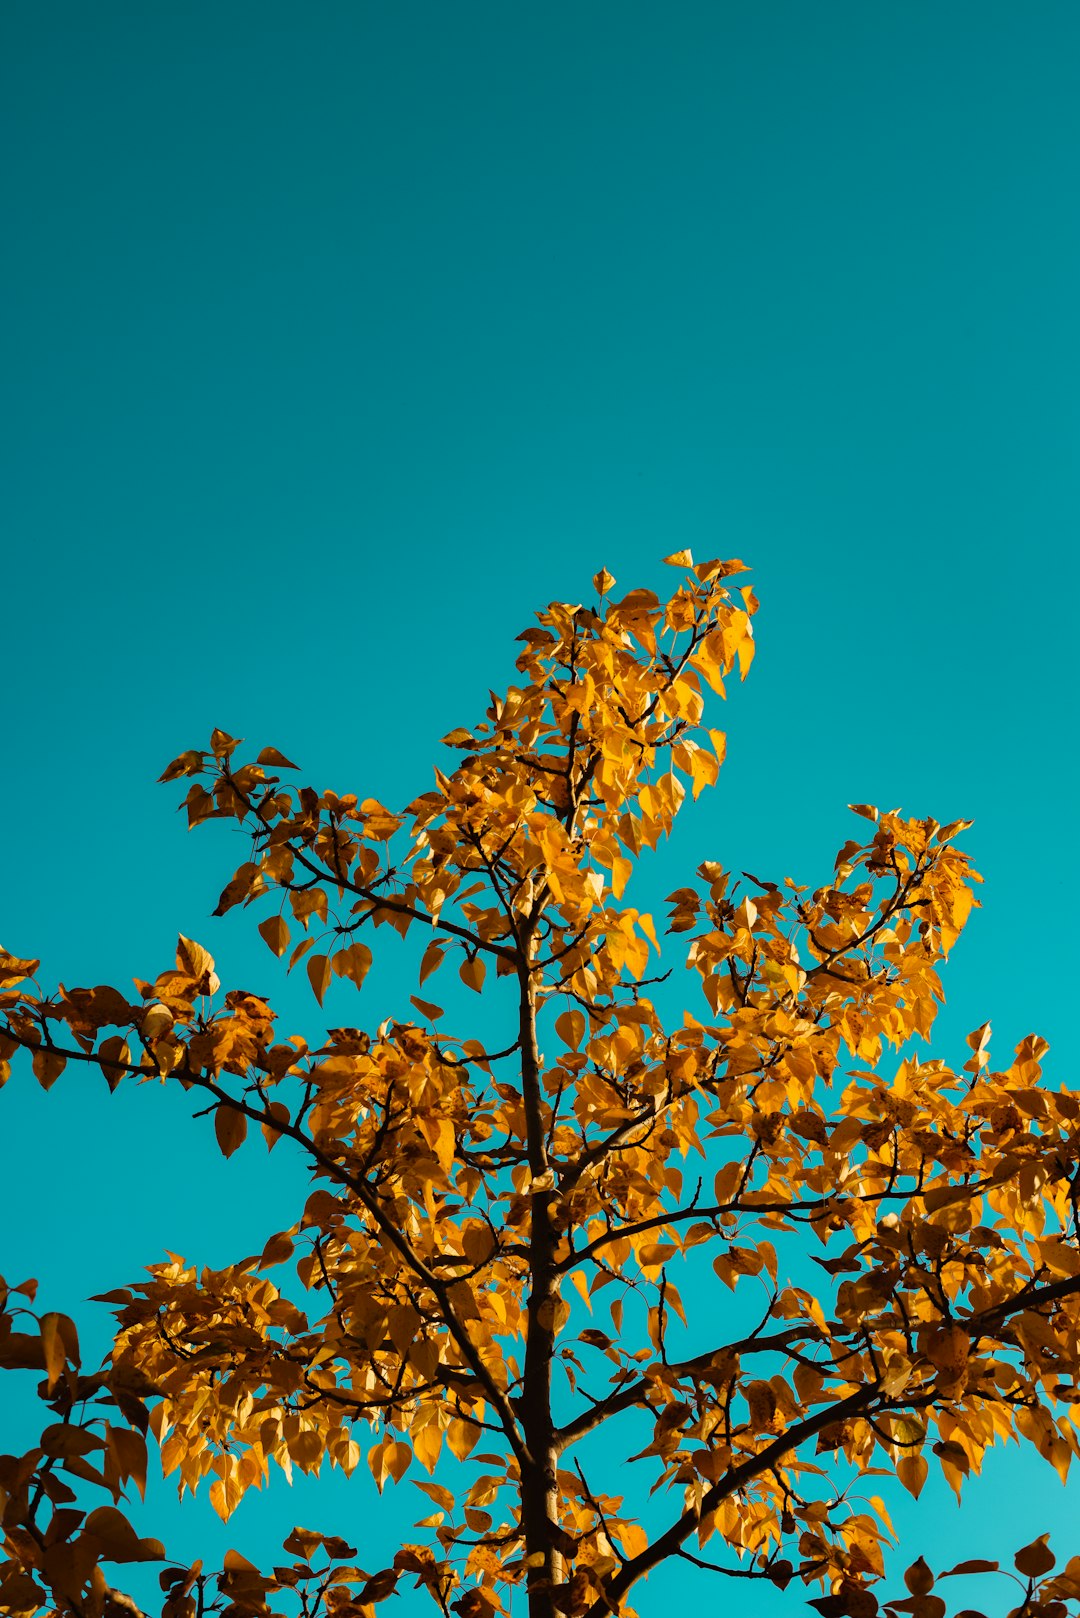 brown leaves on brown tree branch under blue sky during daytime